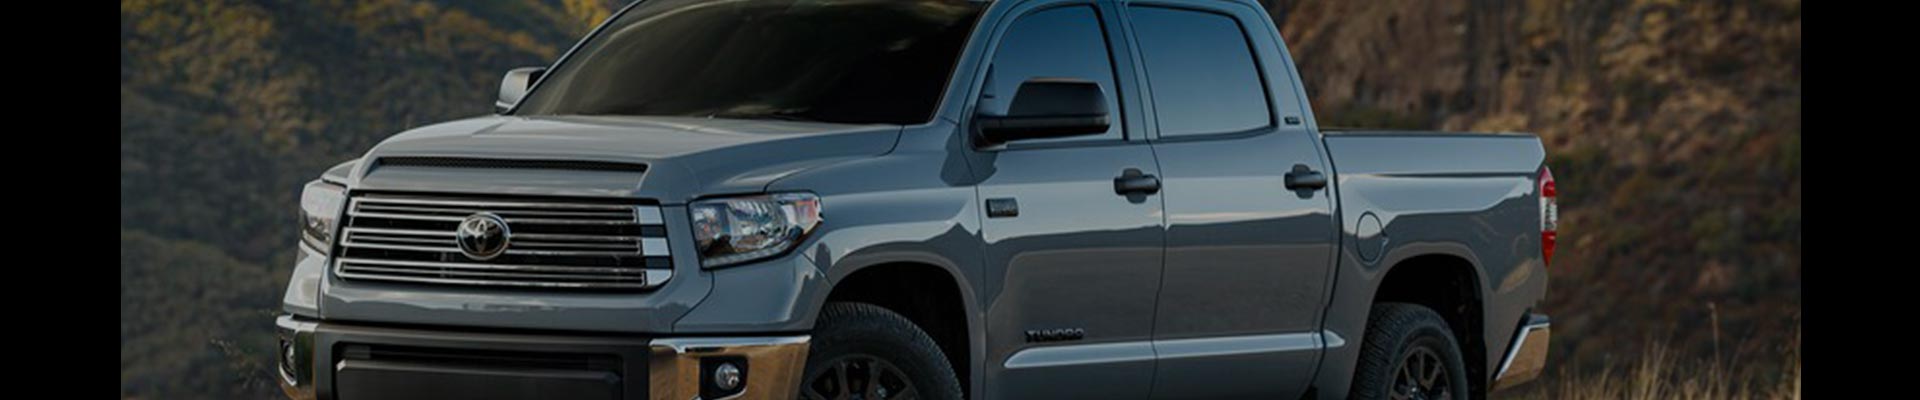 Shop Replacement and OEM 2009 Toyota Tundra Parts with Discounted Price on the Net